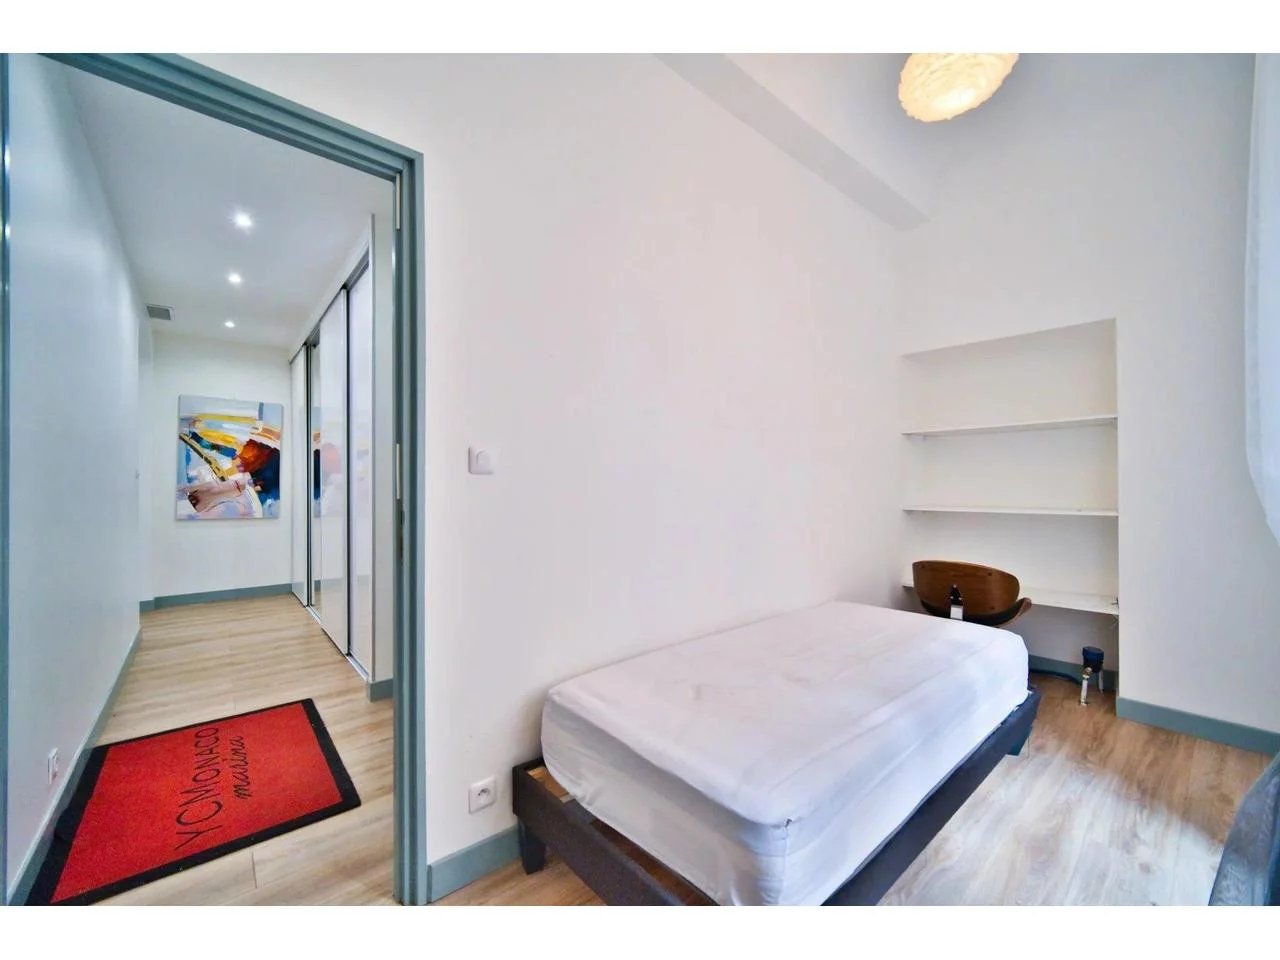 Appartement  4 Rooms 92m2  for sale   575 000 €